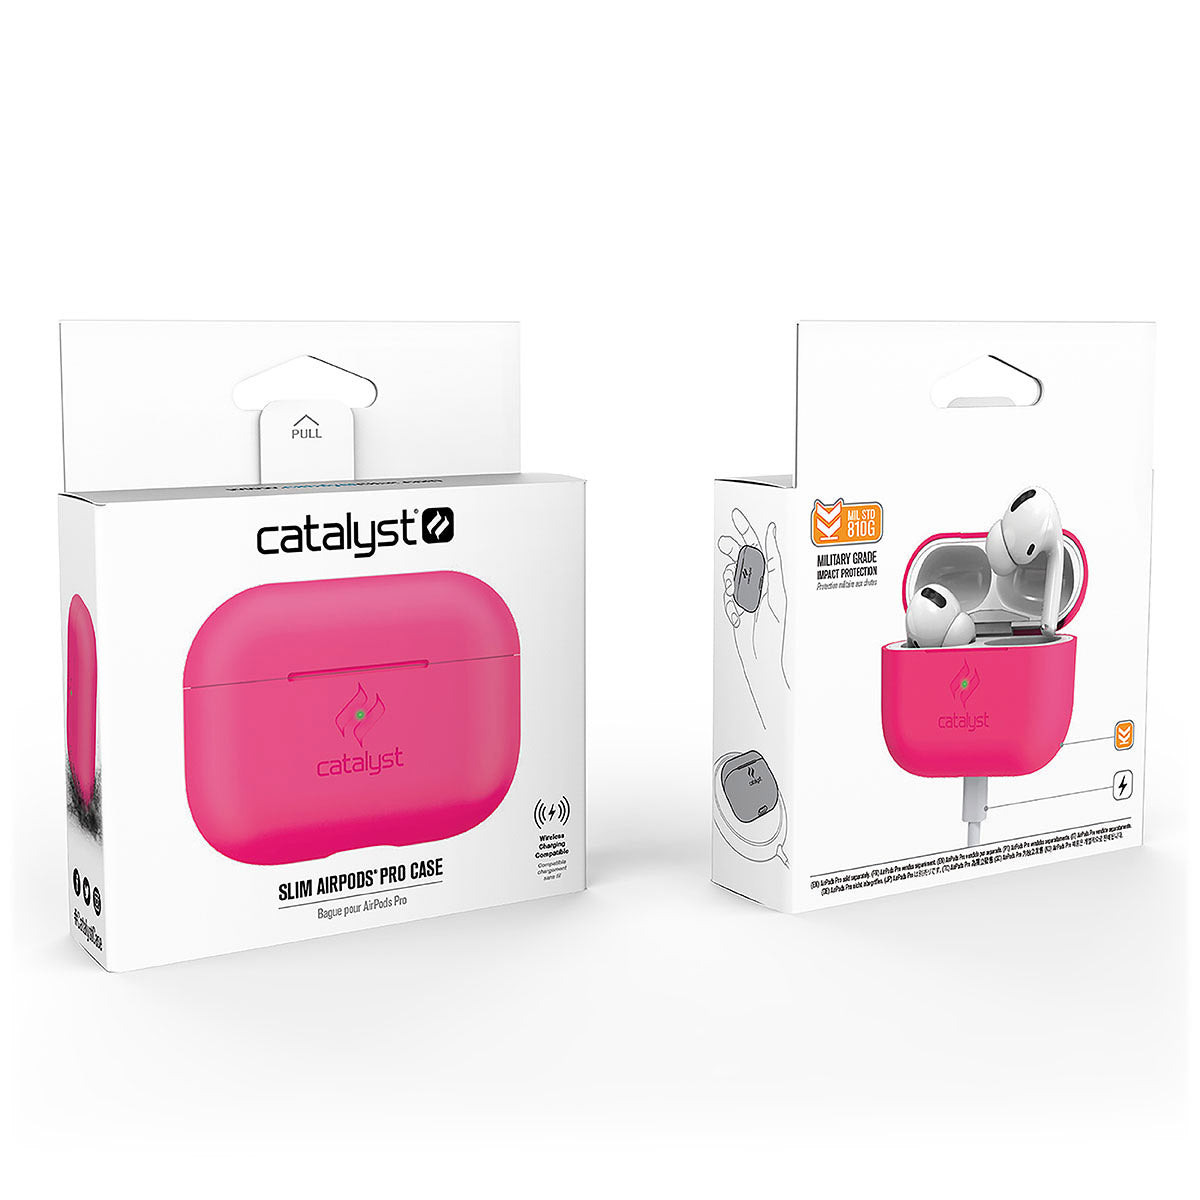 Catalyst airpods pro gen 2/1 slim case showing the front and back view of the packaging in a neon pink colorway